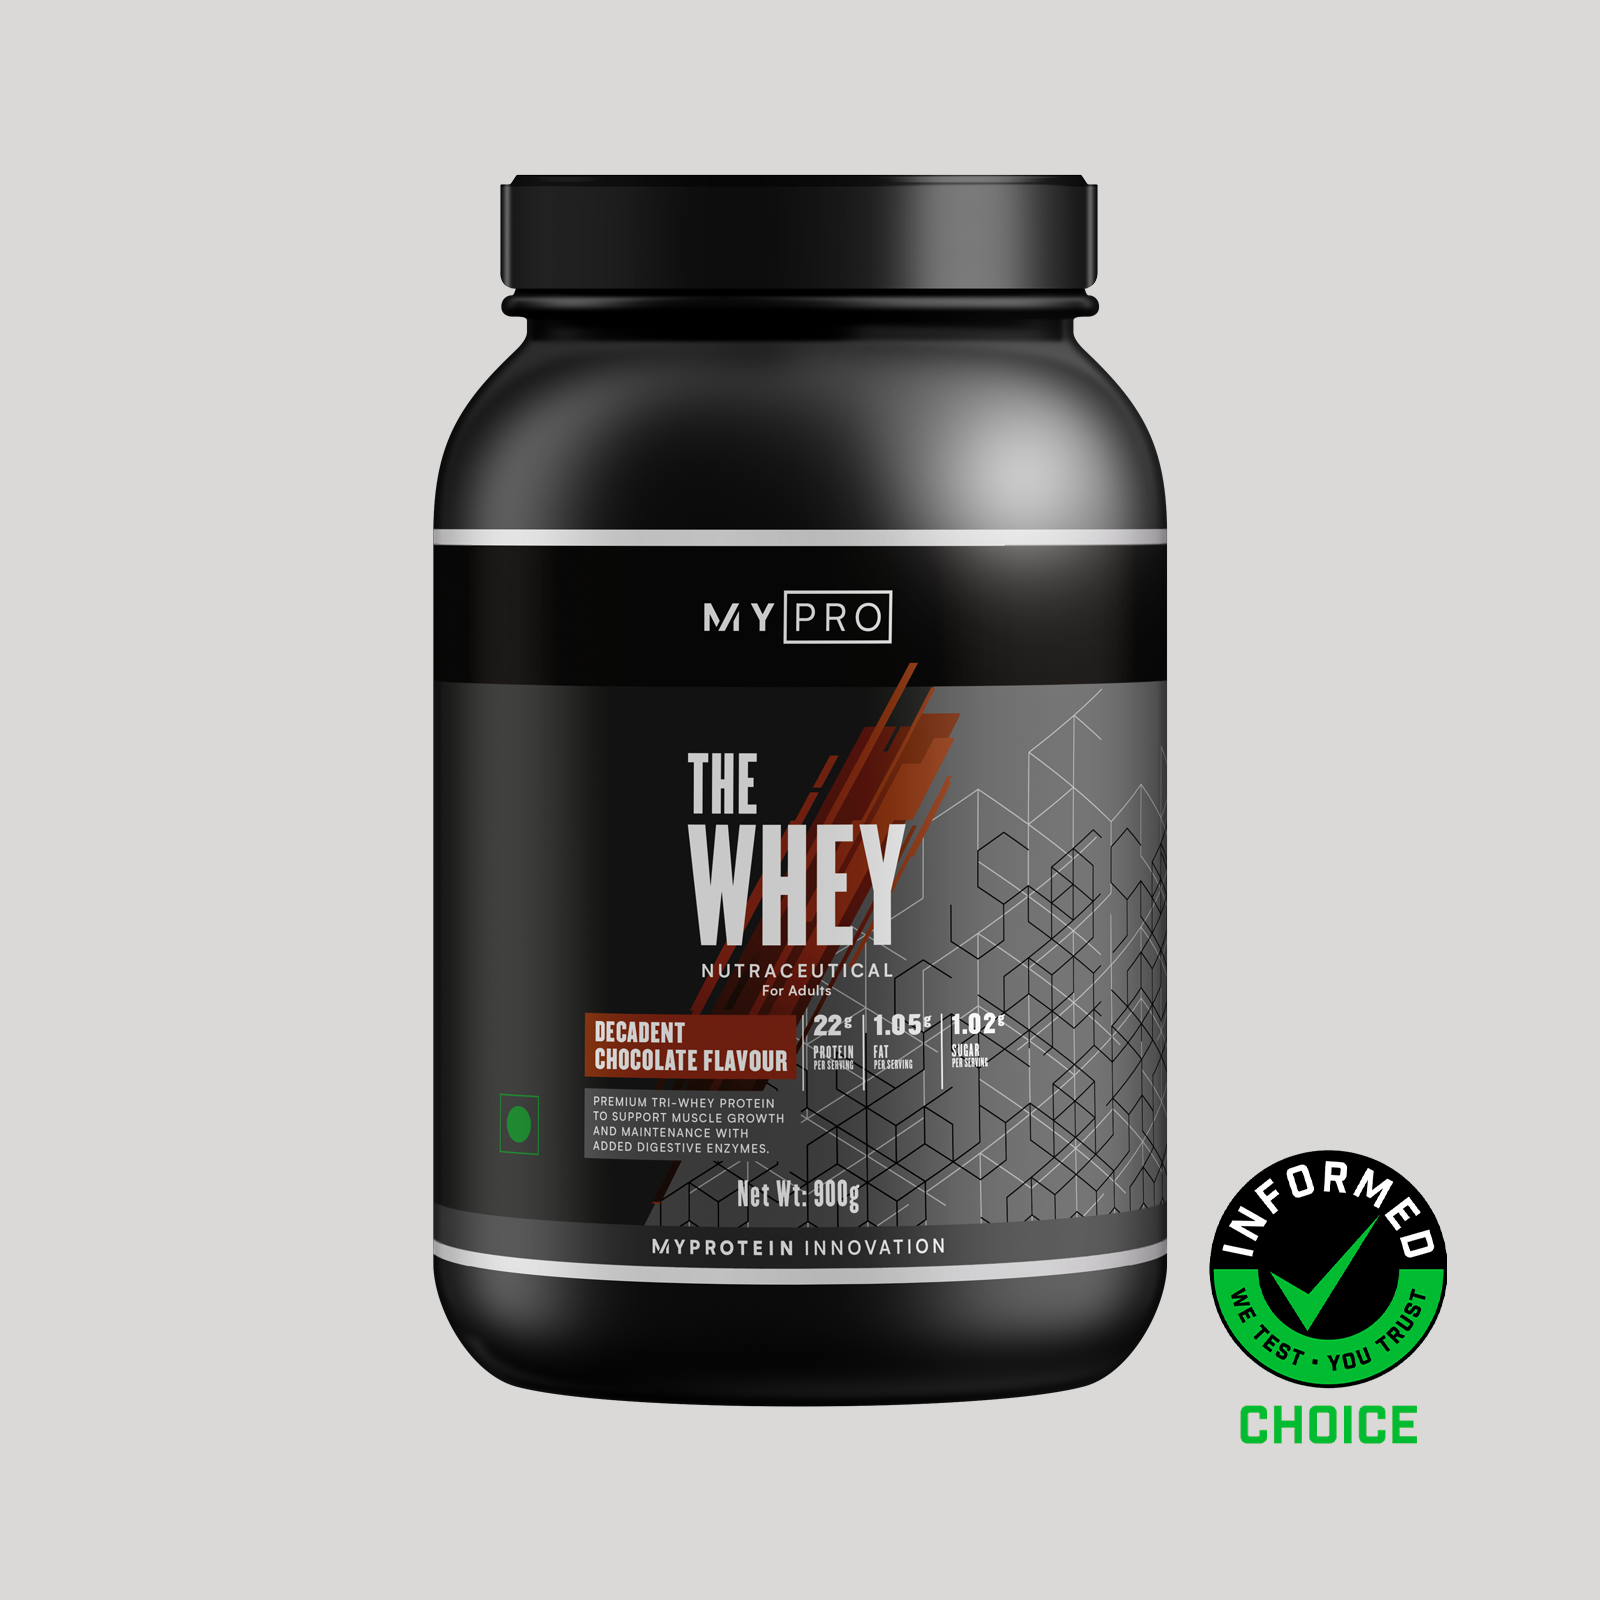 THE WHEY